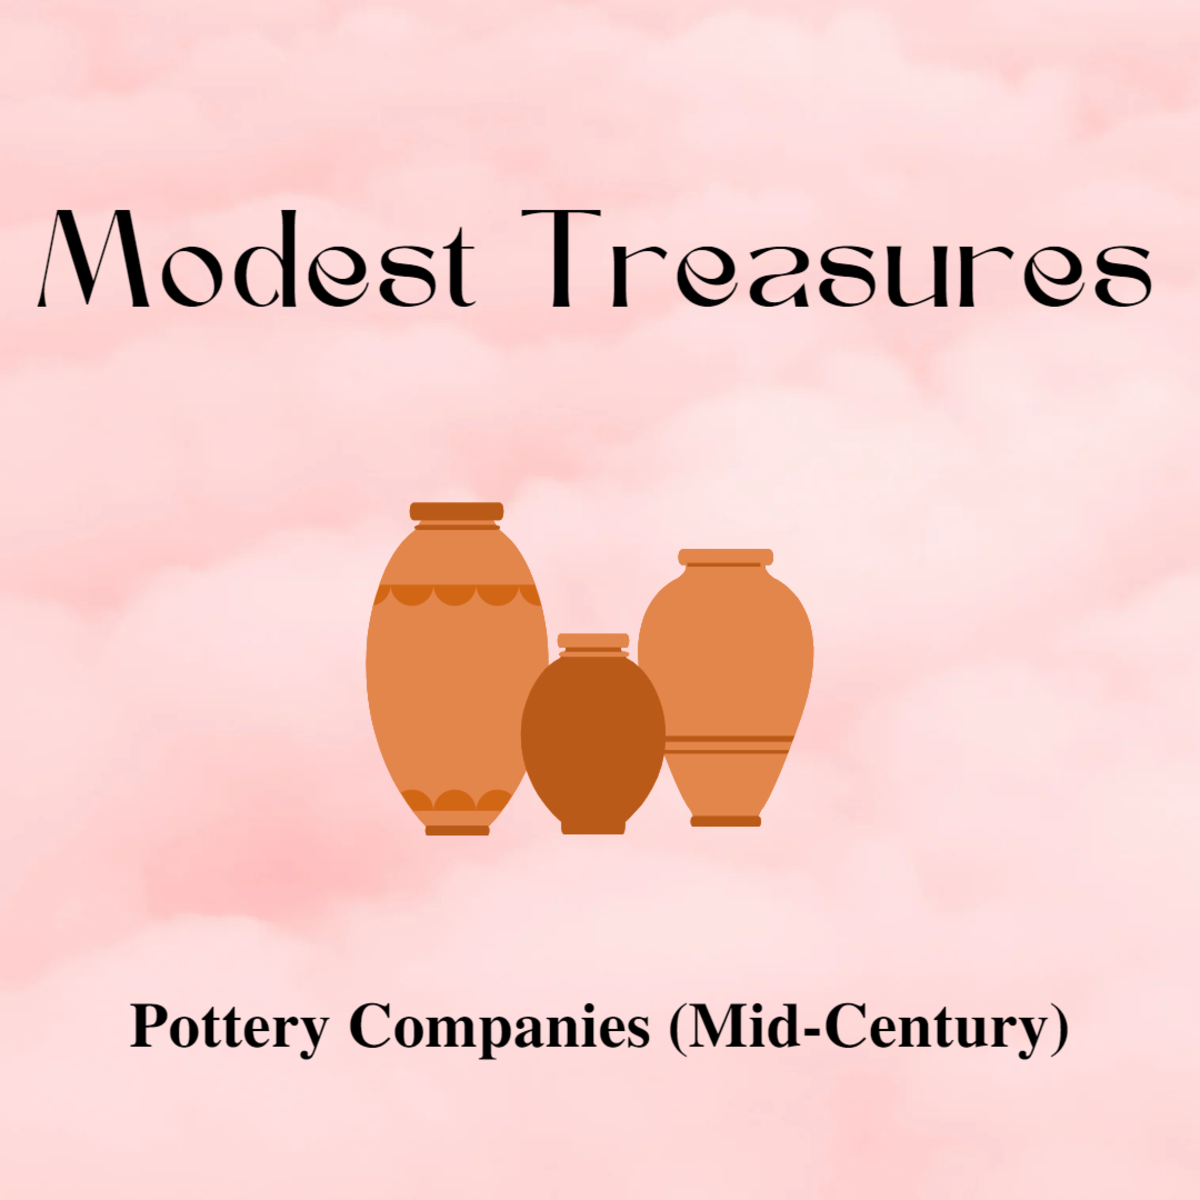 https://images.saymedia-content.com/.image/t_share/MTk0NjQ4MzU5OTY3OTI1NDEw/modest-treasures-five-midcentury-american-pottery-companies.png